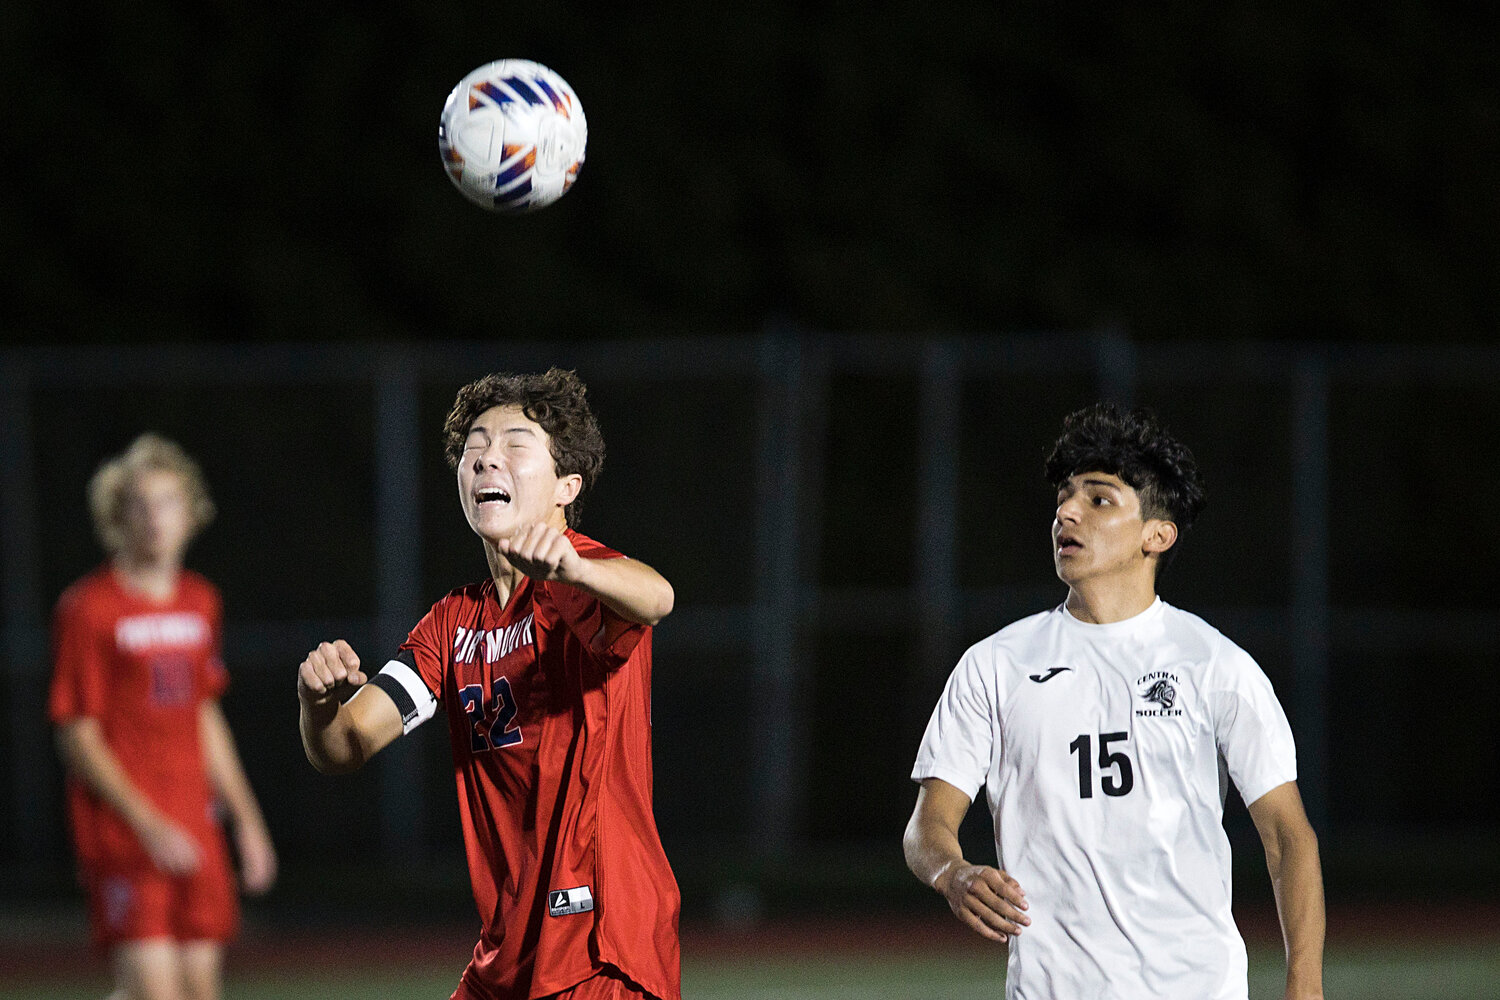 Portsmouth’s Aidan Chen uses his head to settle a pass while battling Central High School at home on Tuesday night.